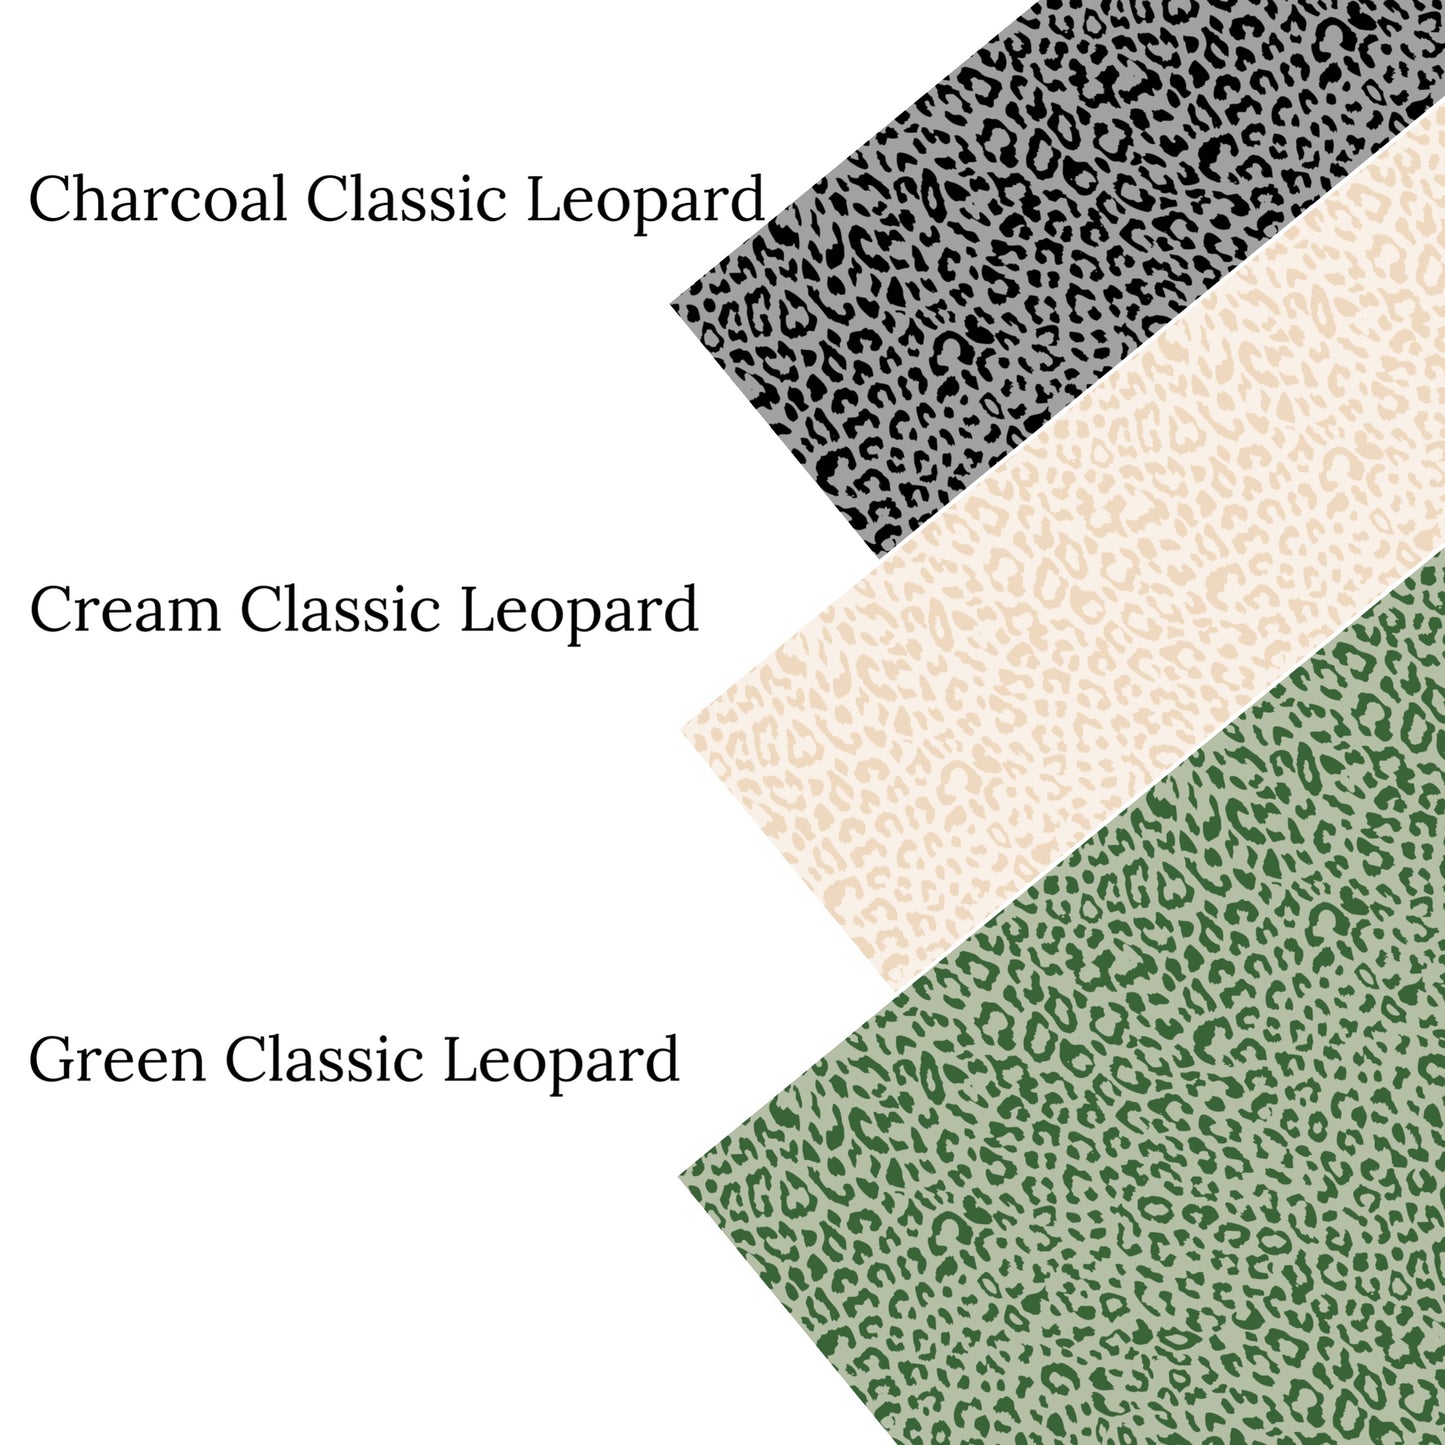 Charcoal Classic Leopard Faux Leather Sheets